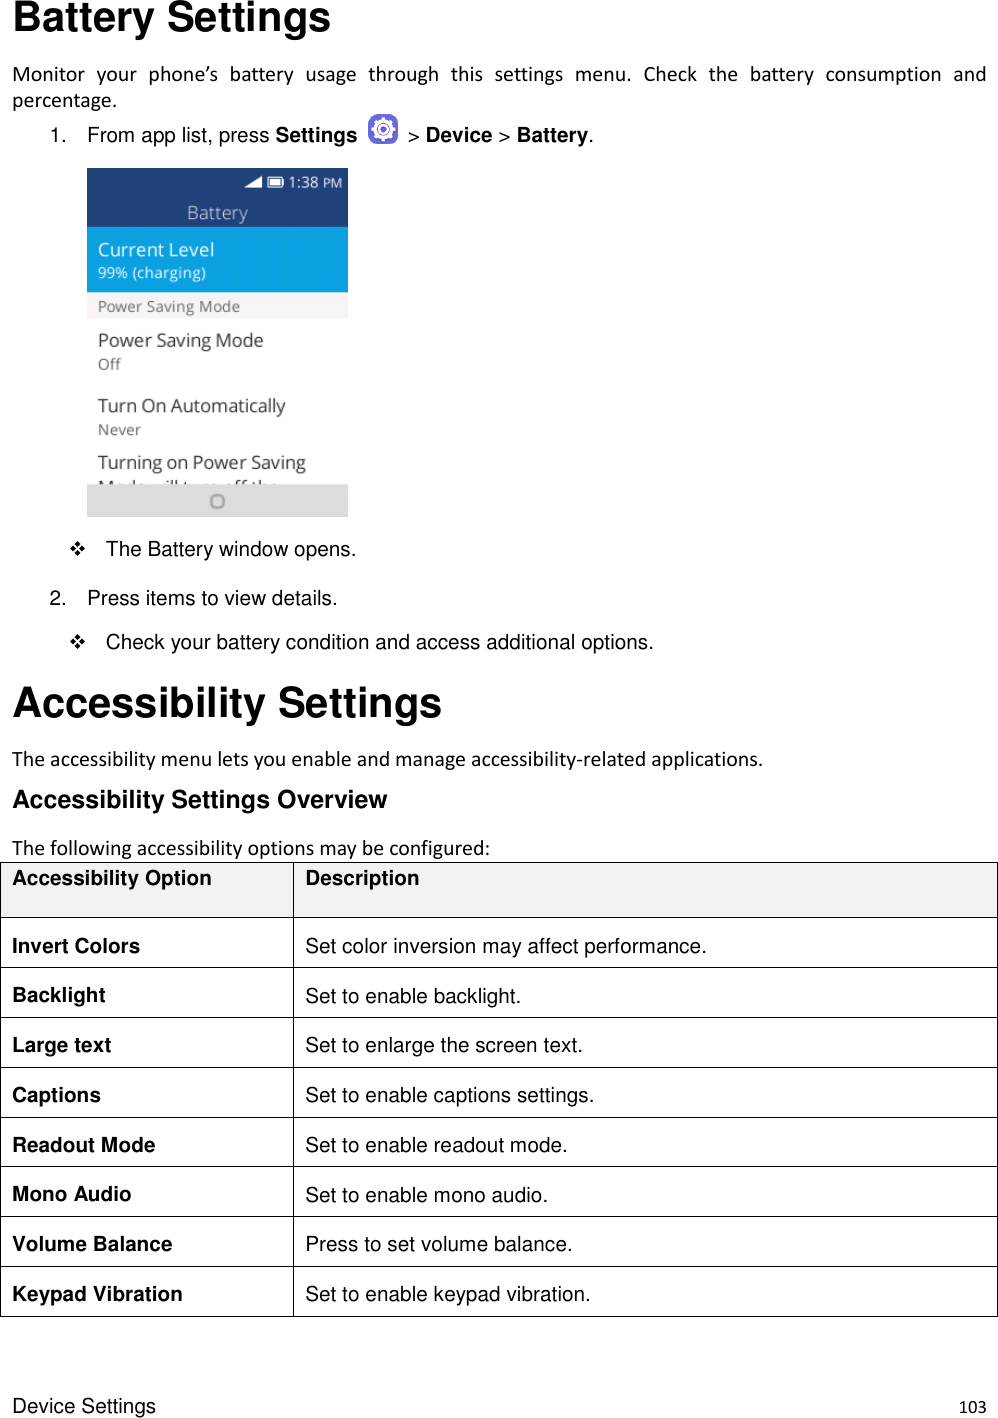 Device Settings    103 Battery Settings Monitor  your  phone’s  battery  usage  through  this  settings  menu.  Check  the  battery  consumption  and percentage.   1.  From app list, press Settings    &gt; Device &gt; Battery.         The Battery window opens. 2.  Press items to view details.     Check your battery condition and access additional options. Accessibility Settings The accessibility menu lets you enable and manage accessibility-related applications. Accessibility Settings Overview The following accessibility options may be configured:   Accessibility Option Description Invert Colors Set color inversion may affect performance. Backlight Set to enable backlight. Large text Set to enlarge the screen text. Captions Set to enable captions settings. Readout Mode Set to enable readout mode. Mono Audio Set to enable mono audio. Volume Balance Press to set volume balance. Keypad Vibration Set to enable keypad vibration. 